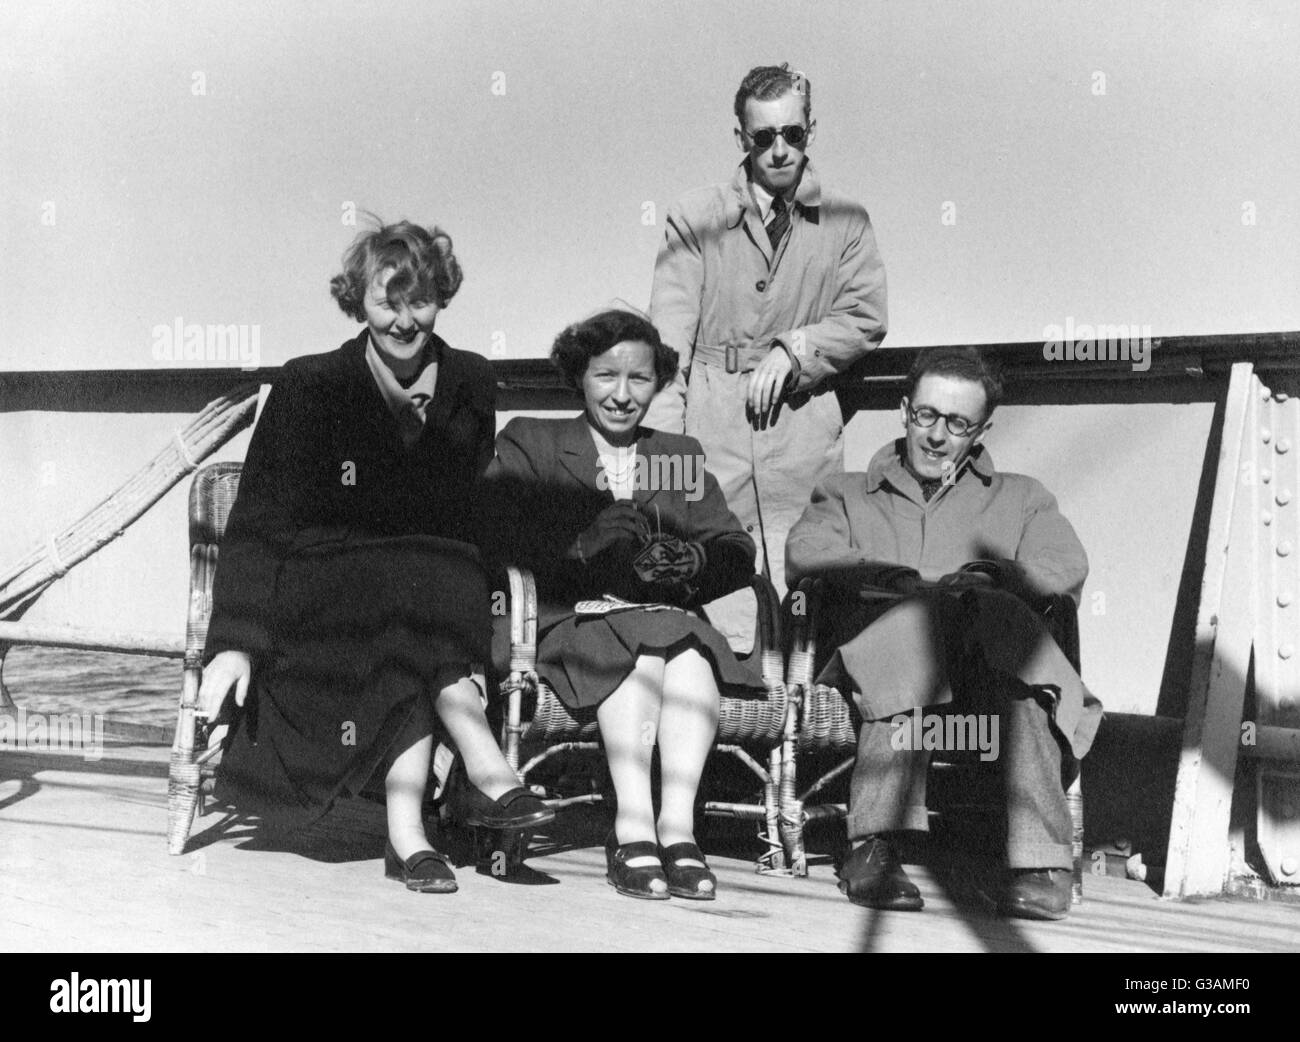 Slightly windswept passengers on deck aboard the ferry on the way to a Holiday in Norway. Sitting on wicker chairs close to the rail, wrapped up in raincoats and mittens!     Date: early 1950s Stock Photo